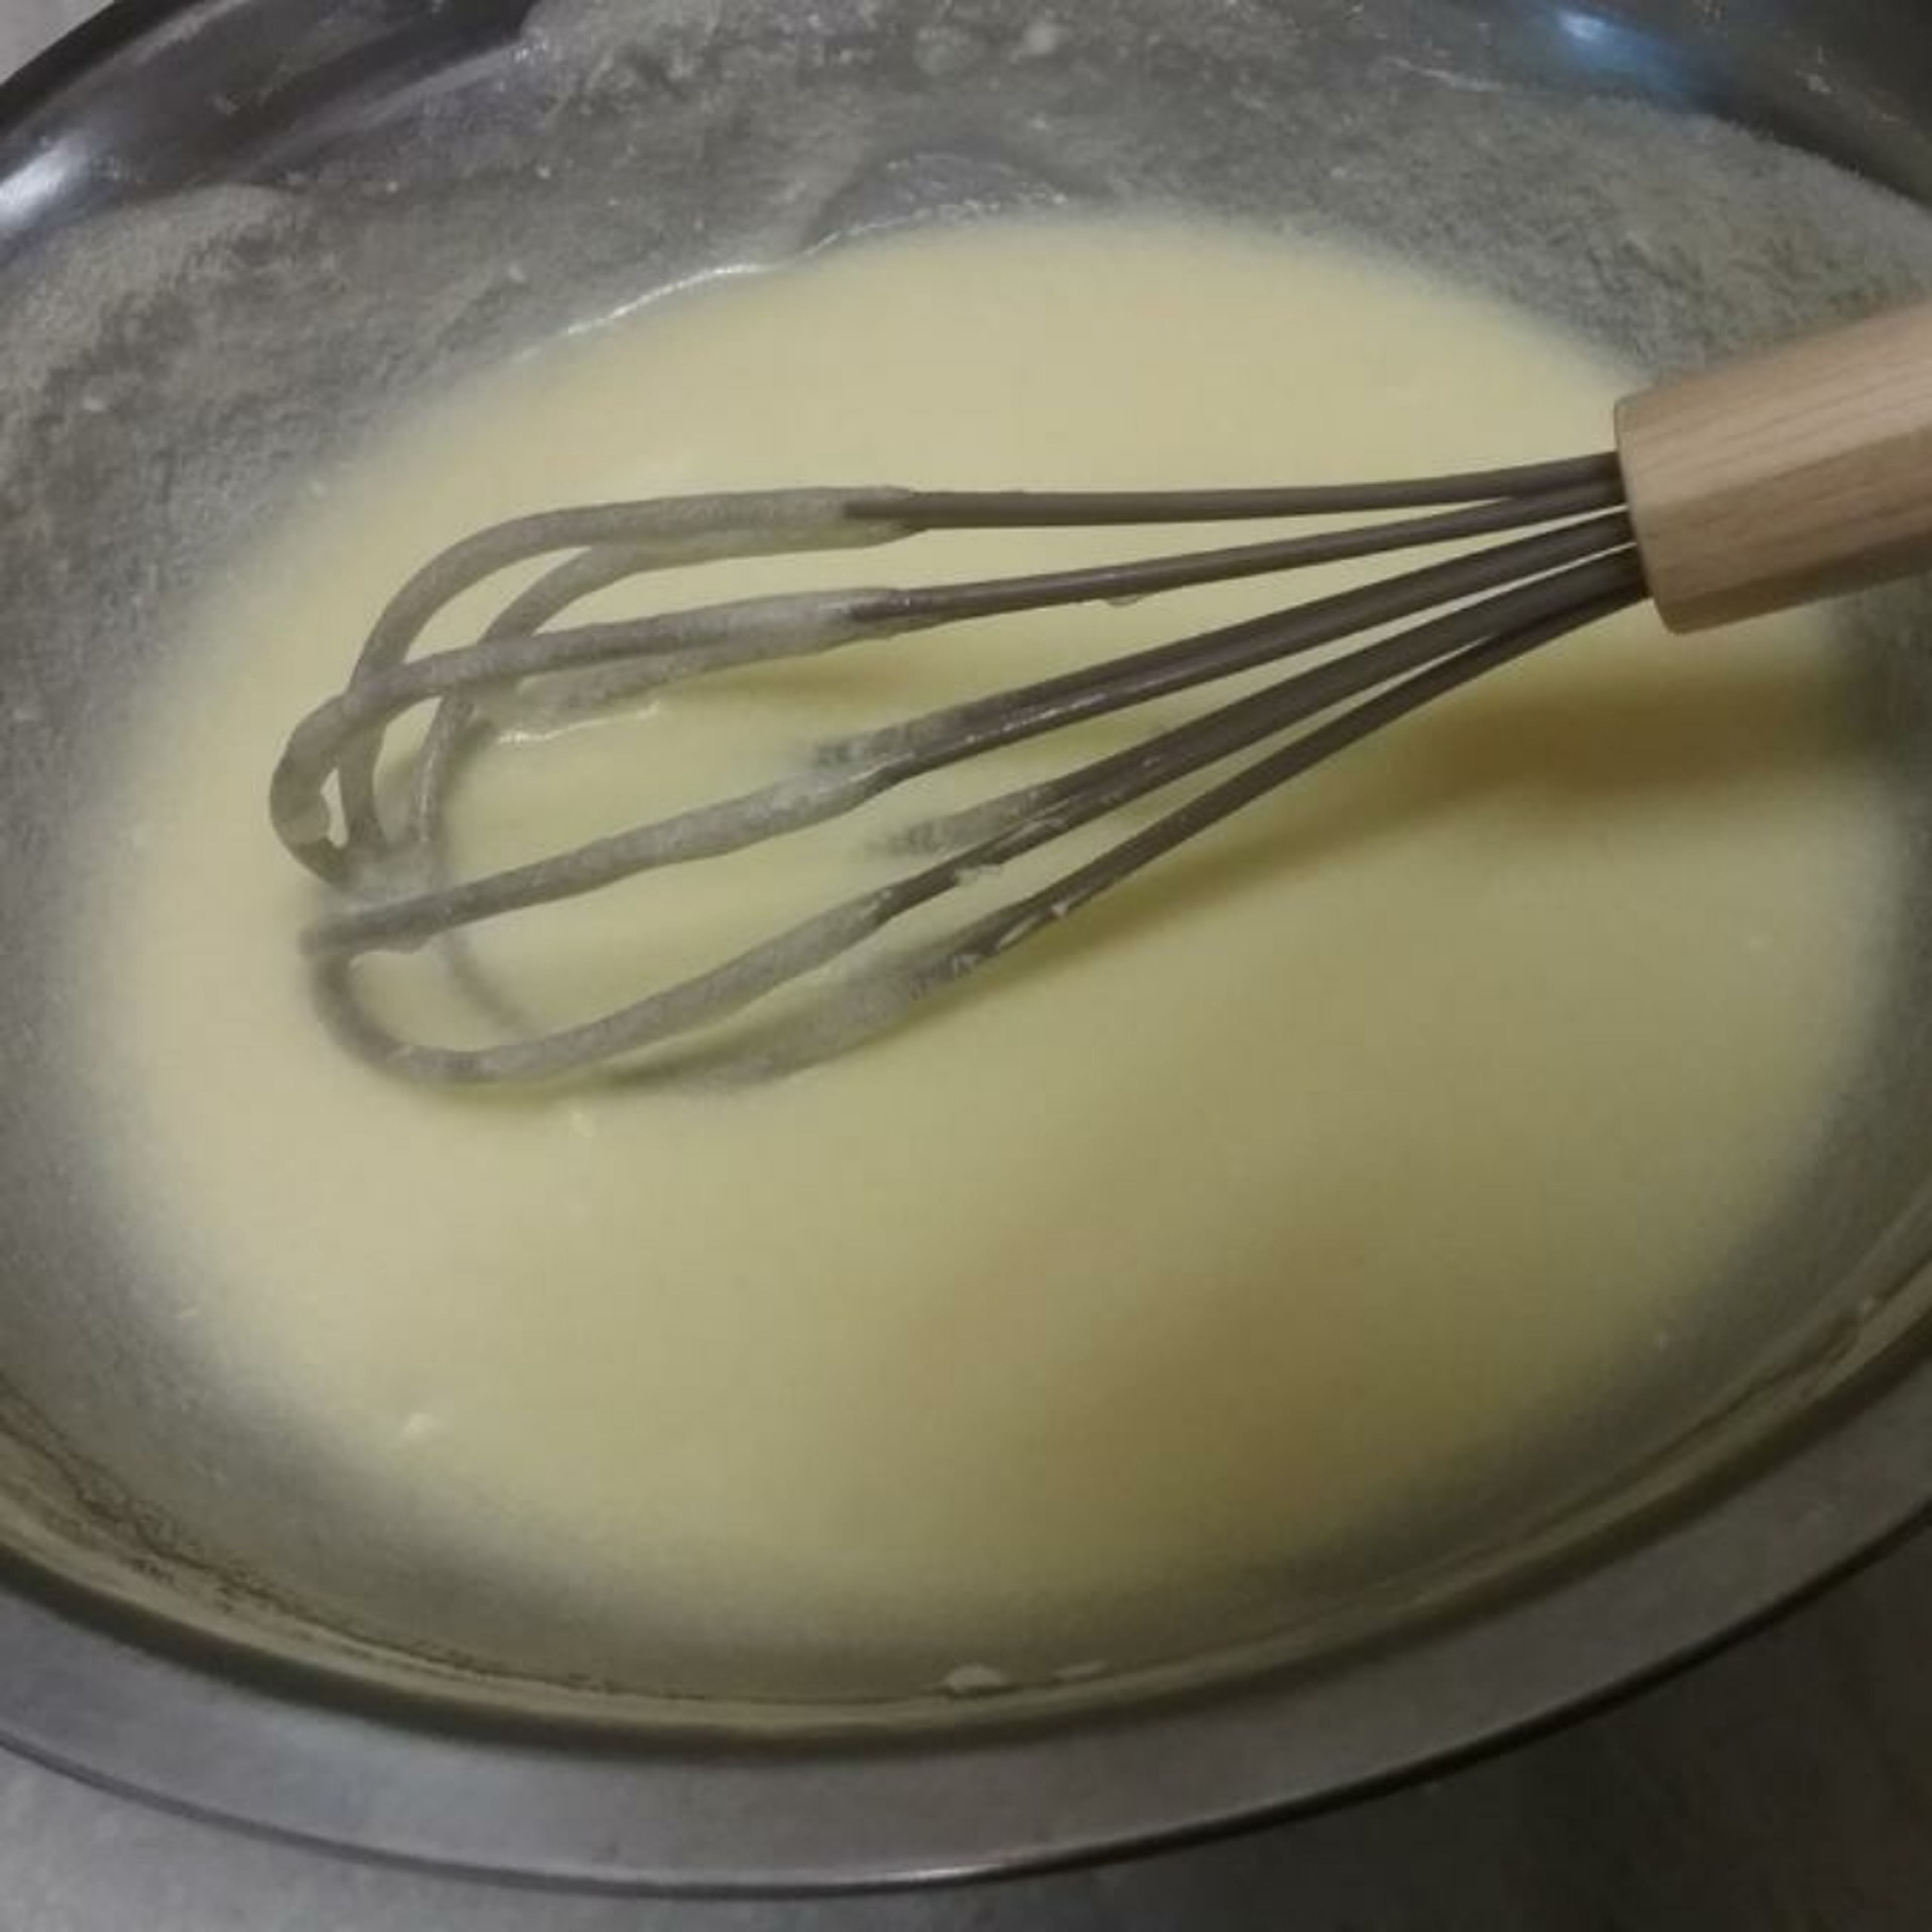 Take another bowl and start mixing the sugar, butter, lemon juice, egg, and vanilla essence.